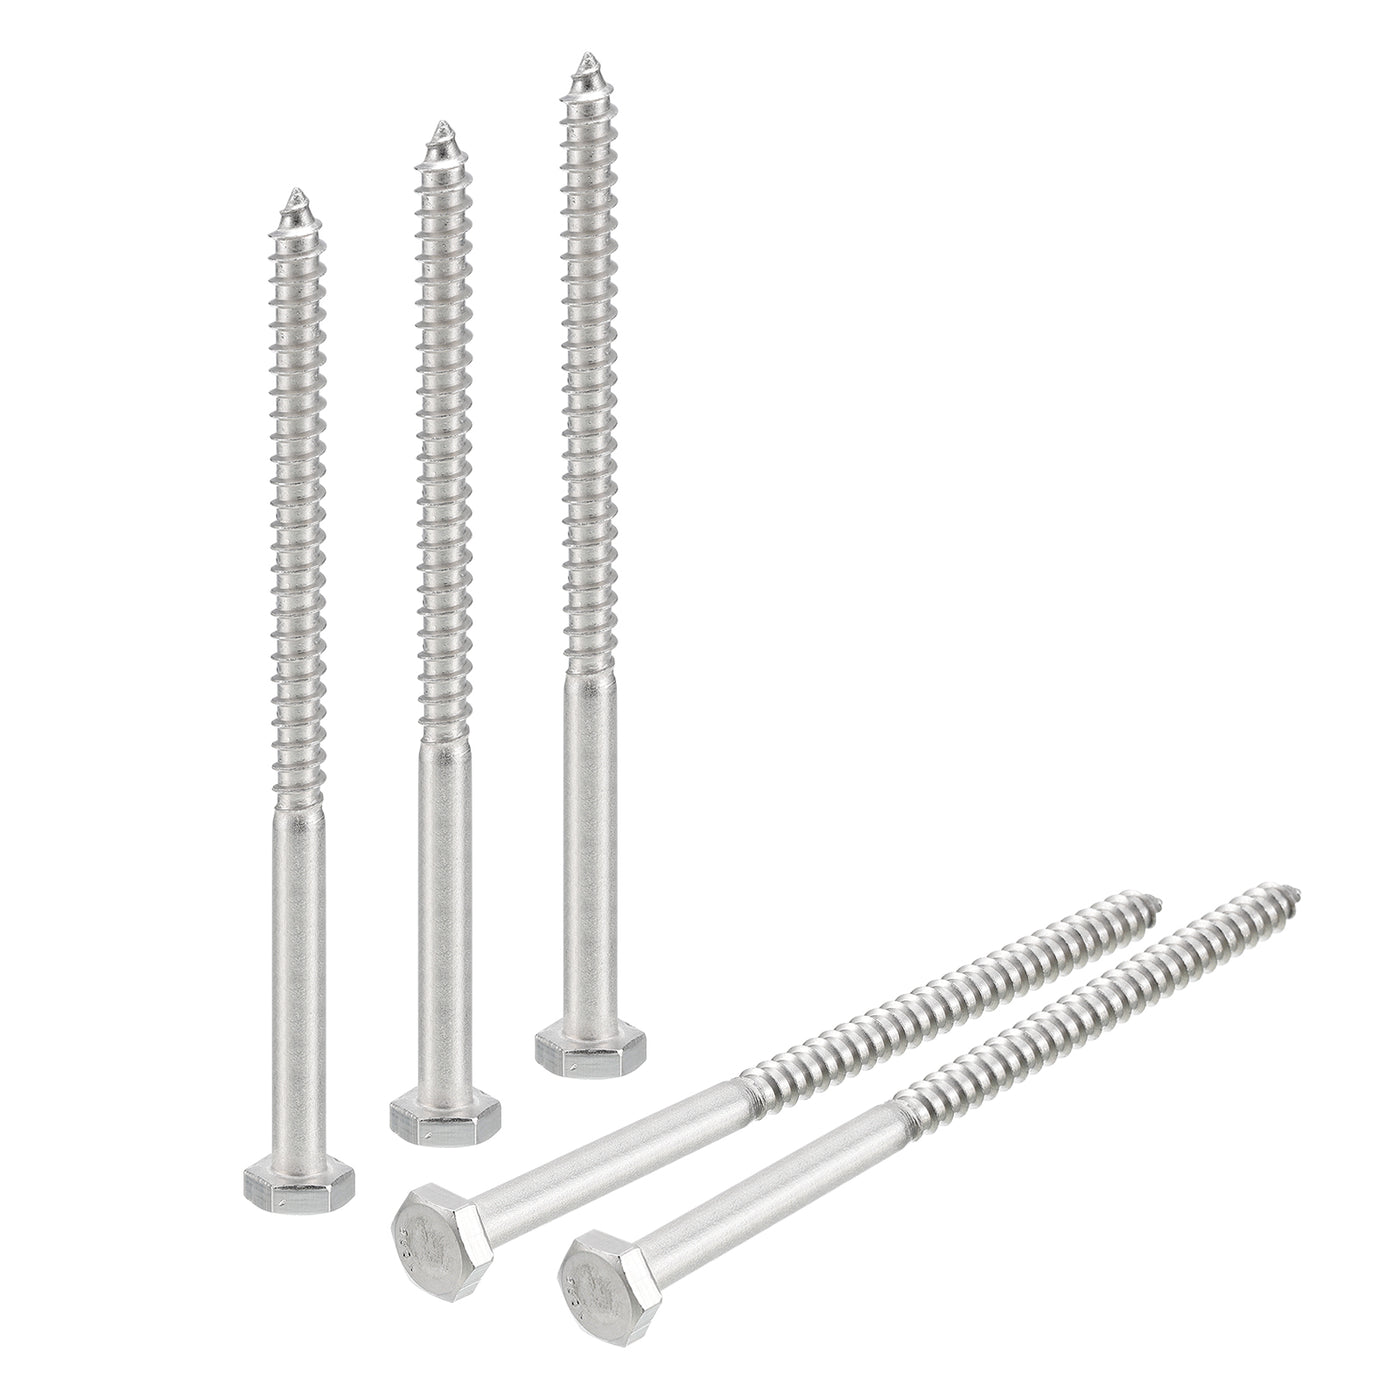 uxcell Uxcell Hex Head Lag Screws Bolts, 10pcs 1/4" x 4" 304 Stainless Steel Wood Screws